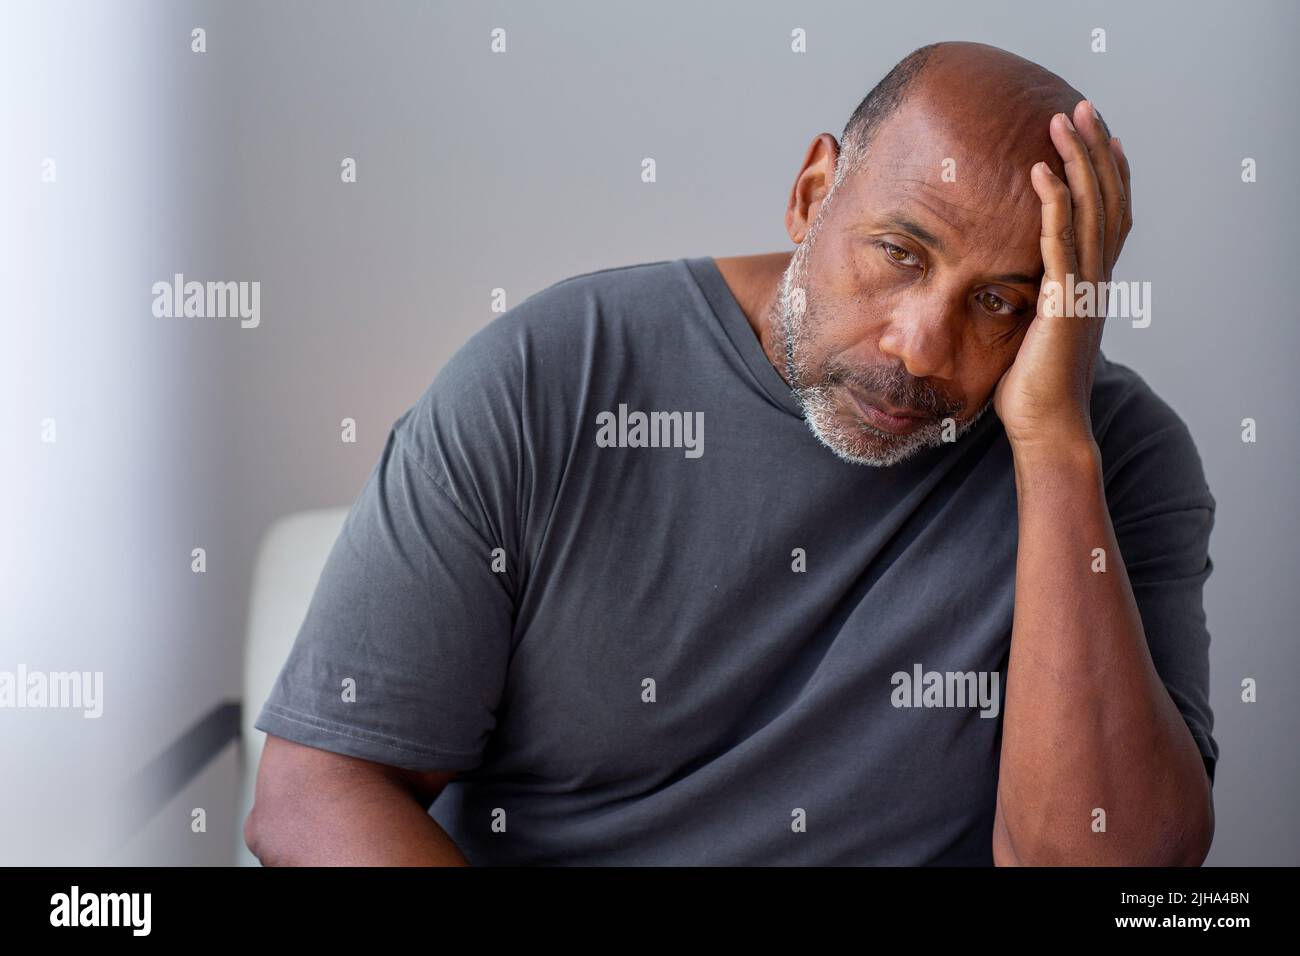 Mature African American man not feeling well with his hands on his head. Stock Photo